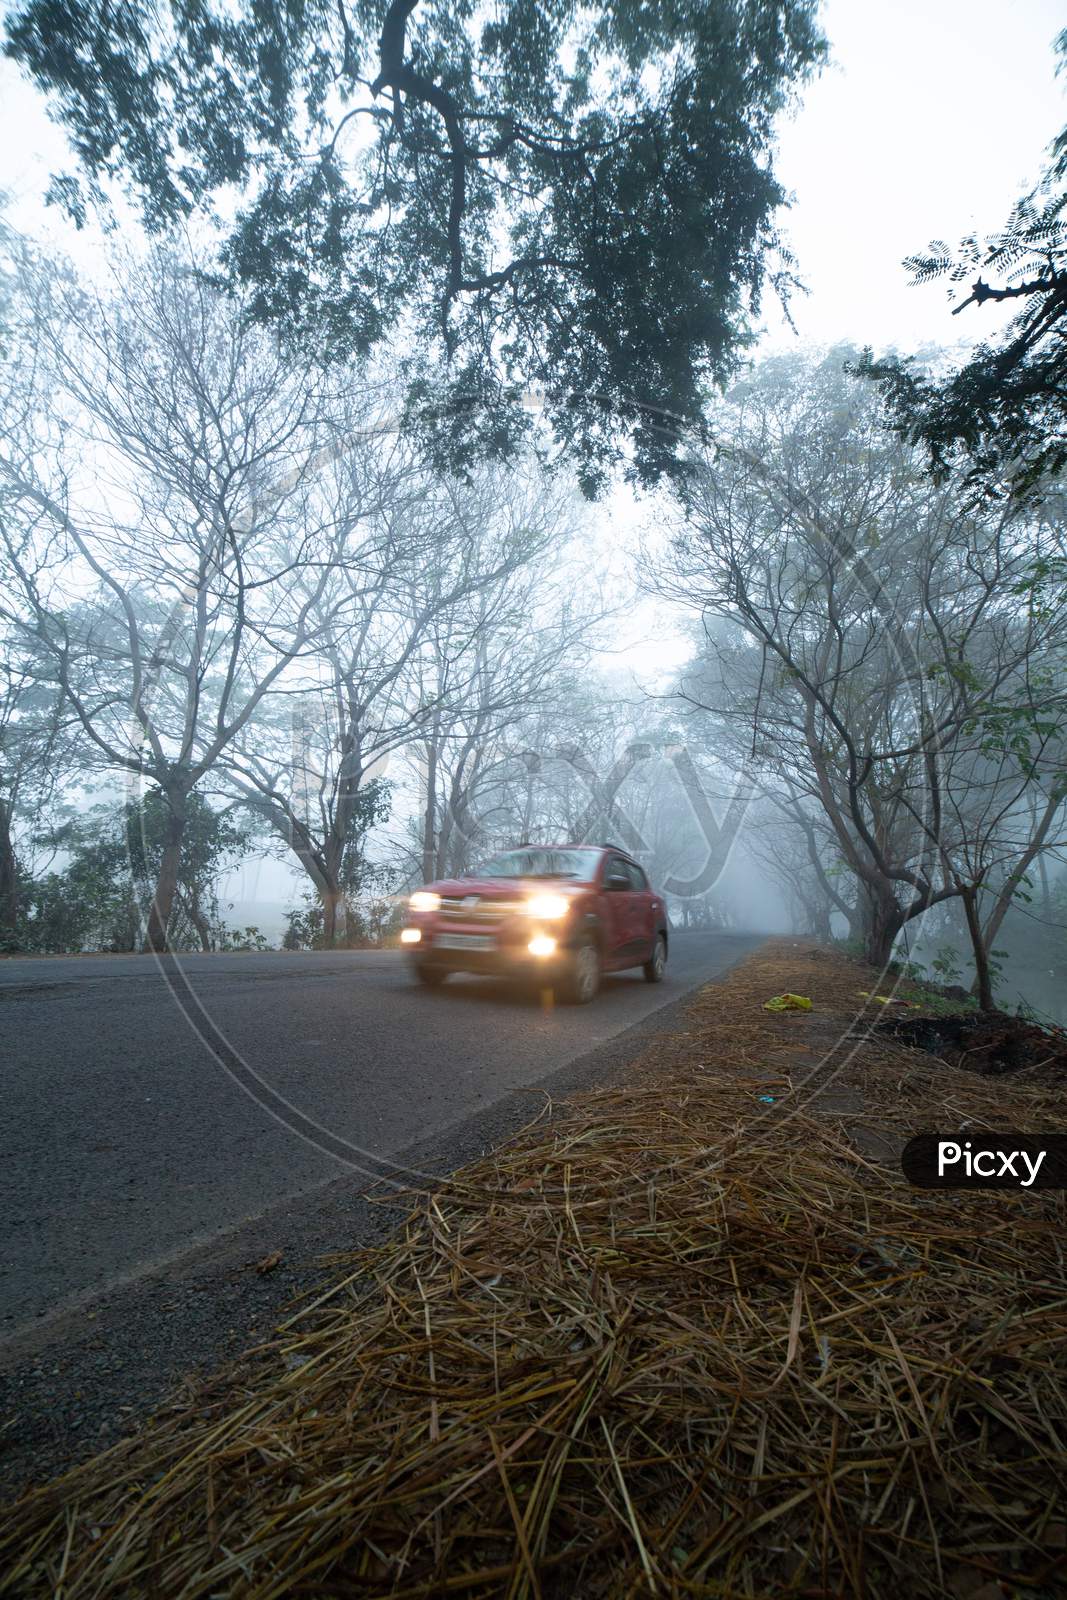 A car moving along the foggy road